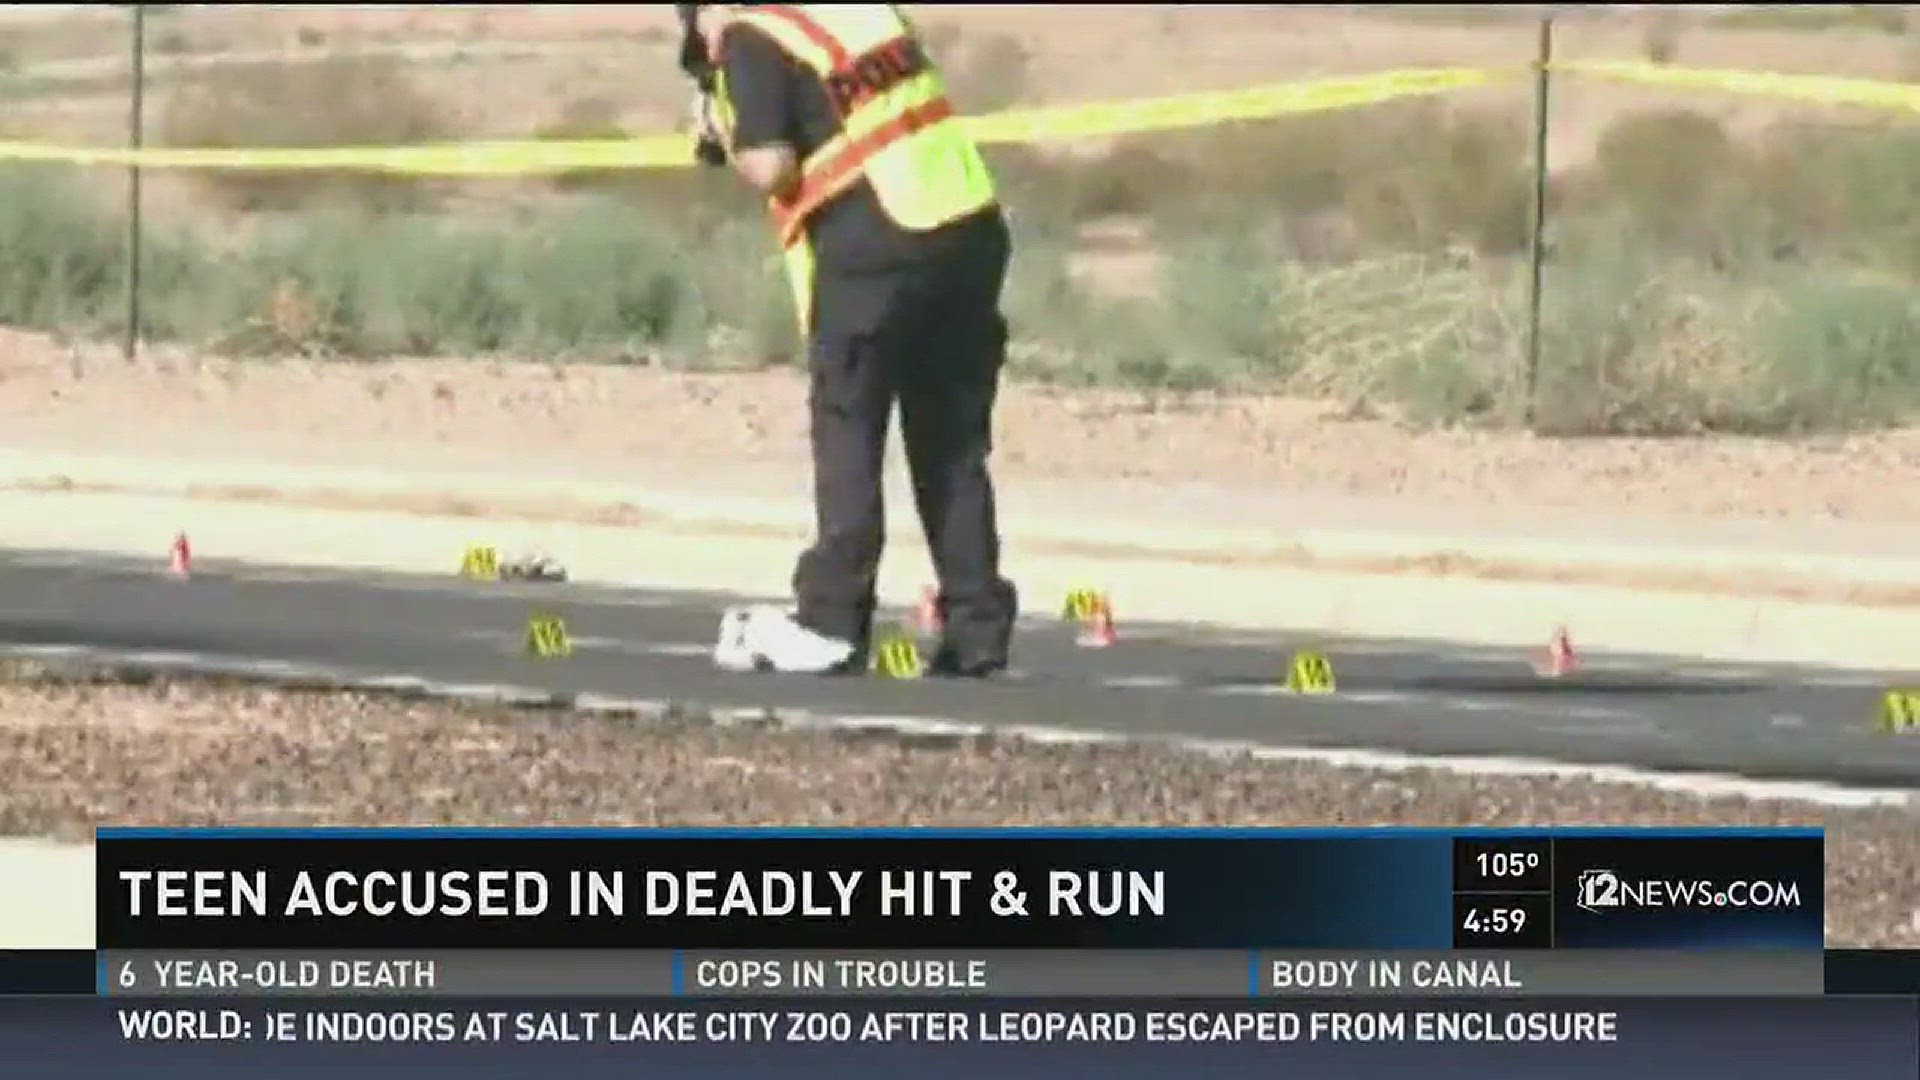 A teen has been accused of killing a 72-year-old man after a hit and run